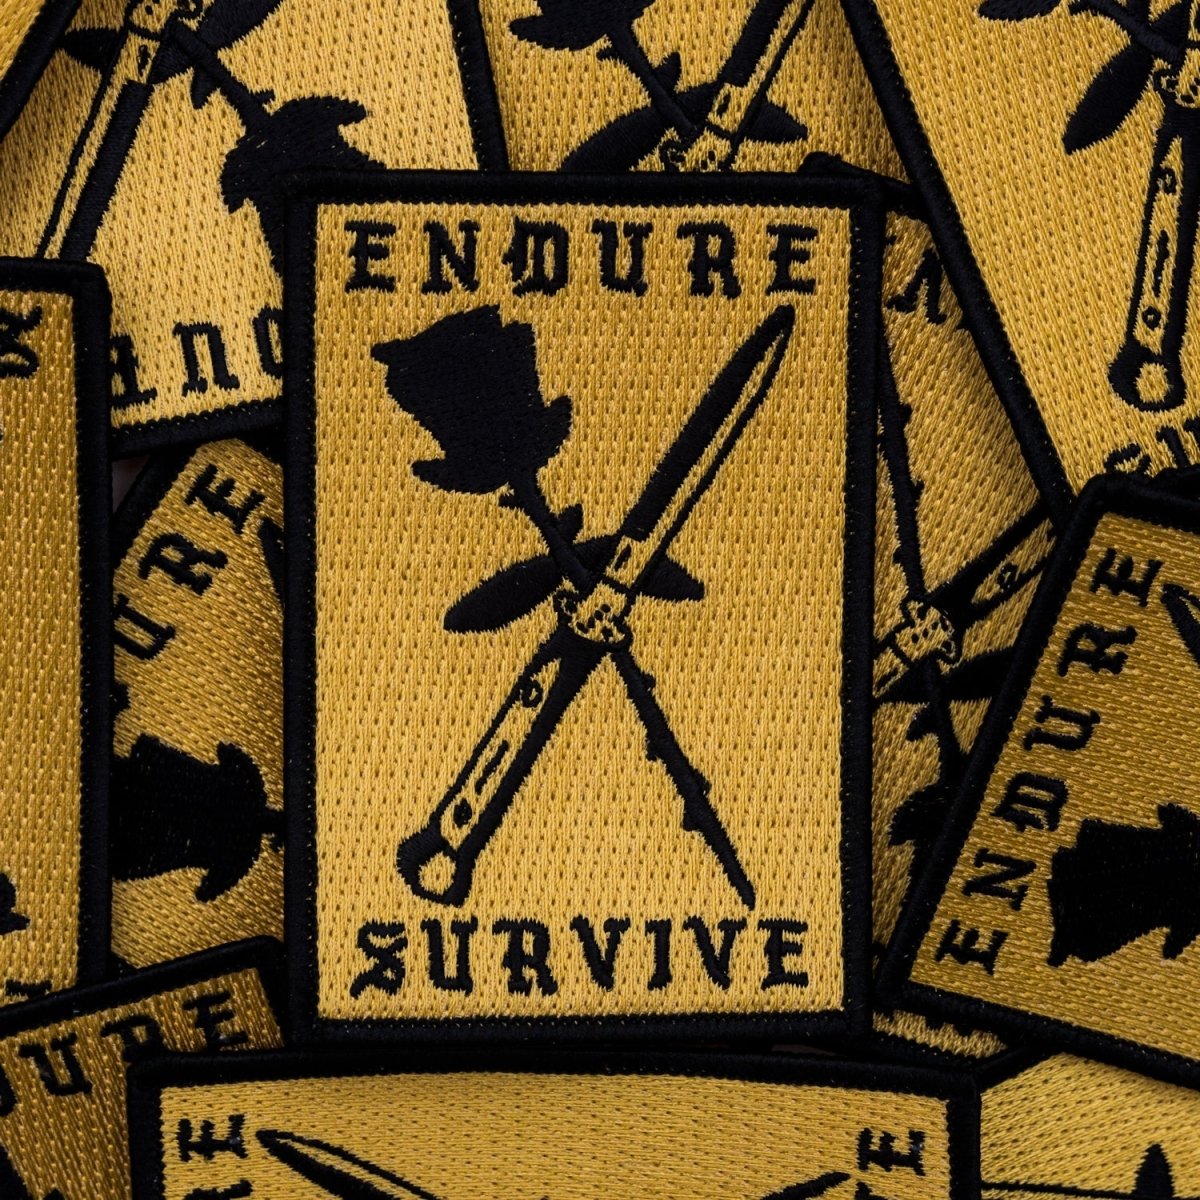 Endure Survive Rose and Switchblade Patch - Patch - Pretty Bad Co.